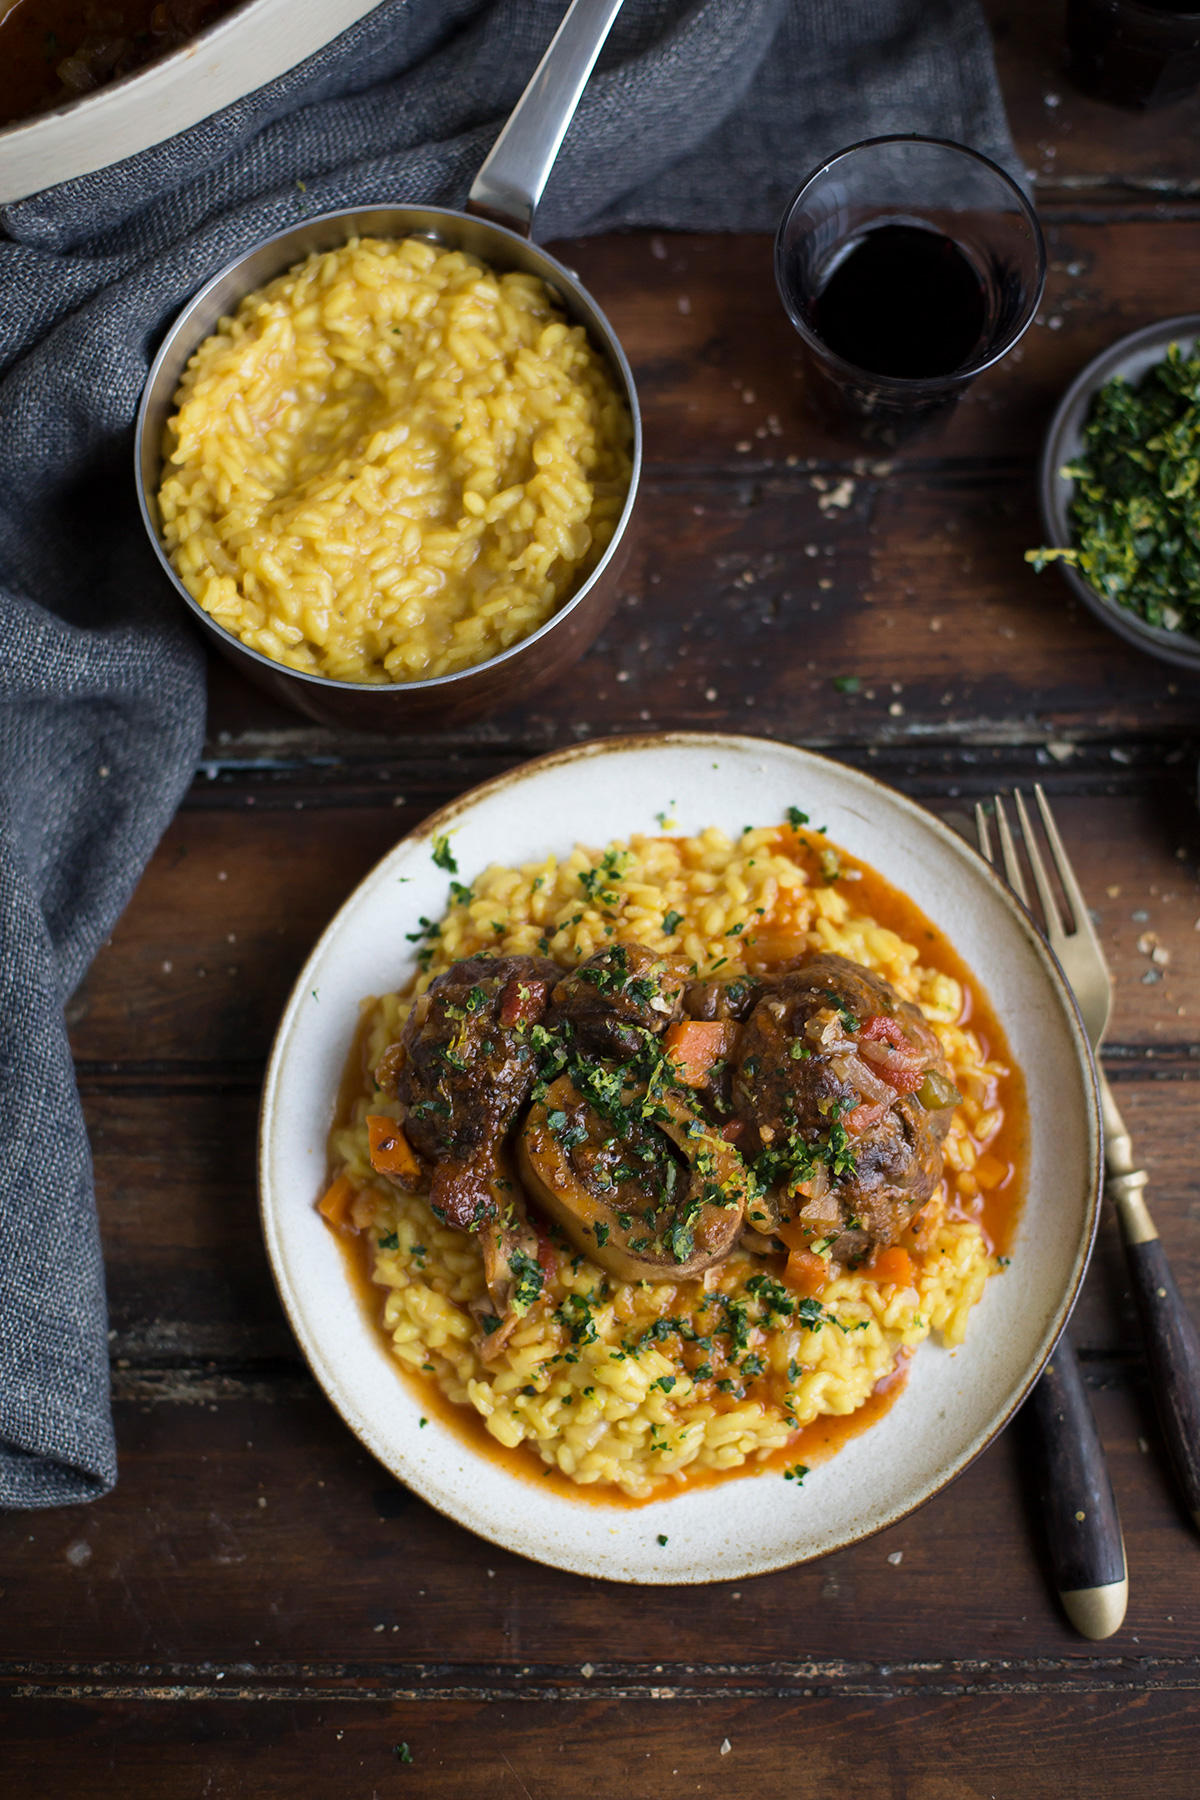 A classic Osso Bucco recipe with risotto Milanese